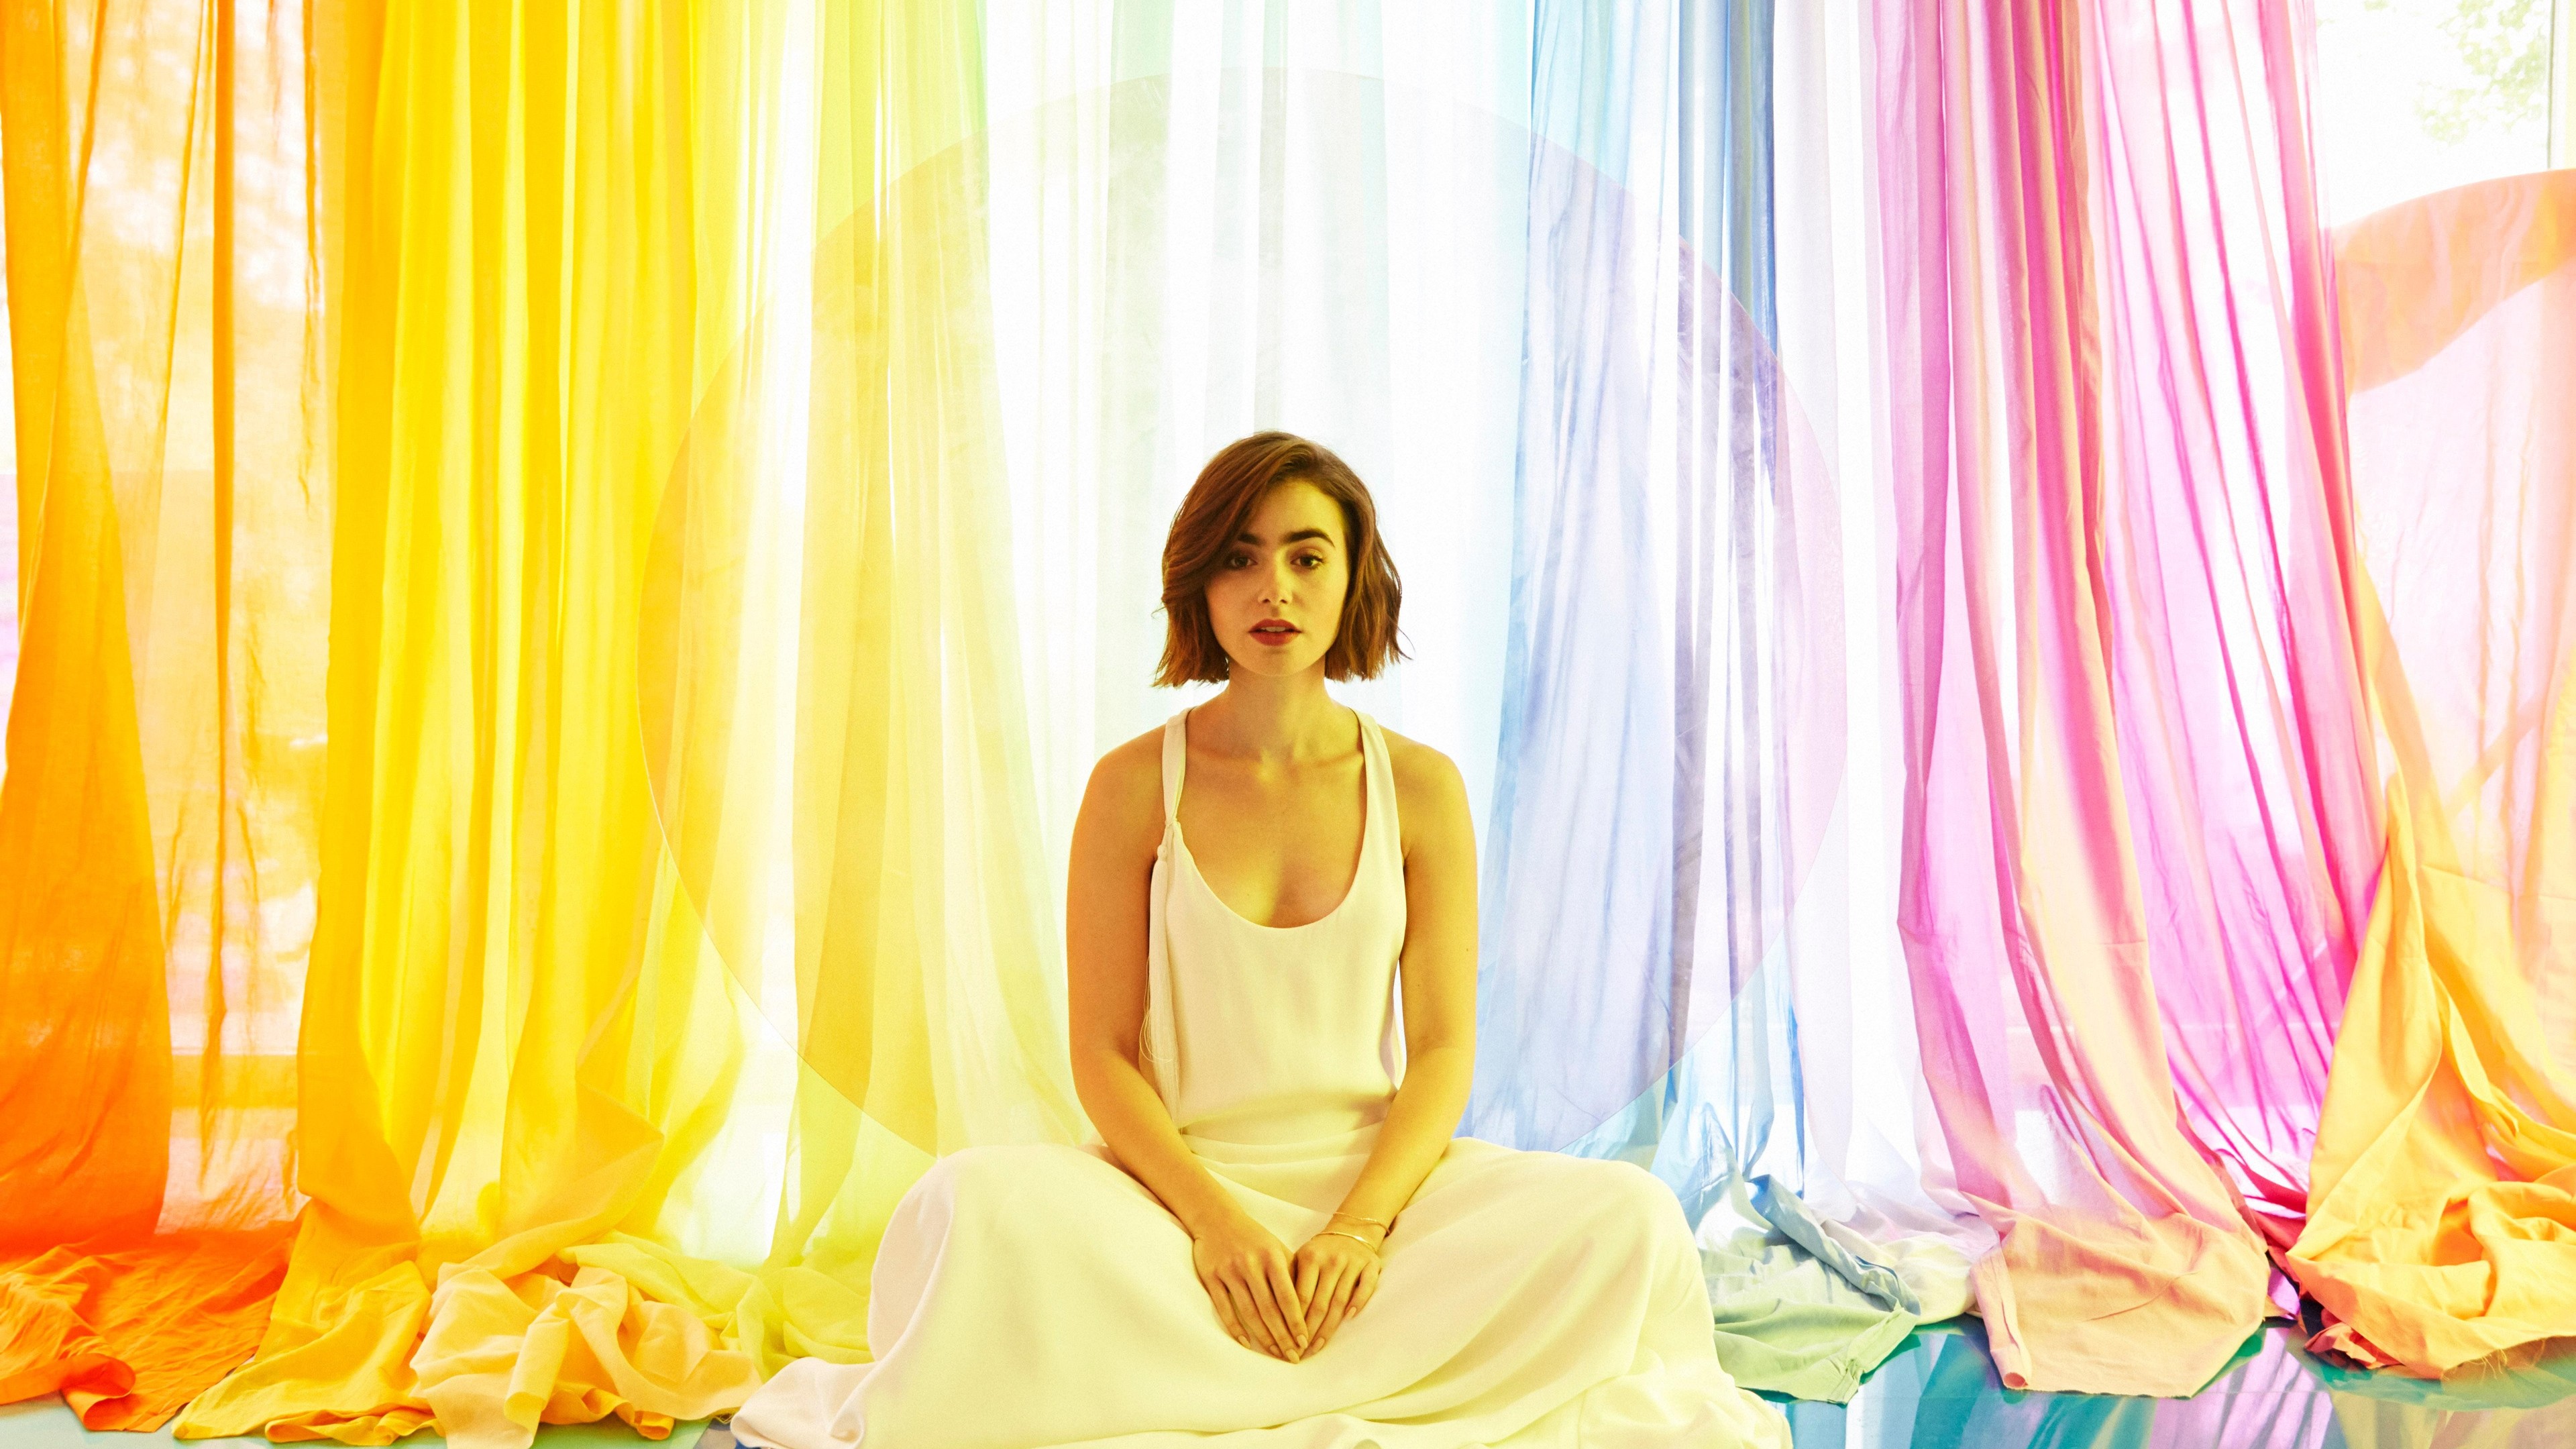 lily collins 5k 2019 1536944517 - Lily Collins 5k 2019 - model wallpapers, lily collins wallpapers, hd-wallpapers, girls wallpapers, celebrities wallpapers, 5k wallpapers, 4k-wallpapers